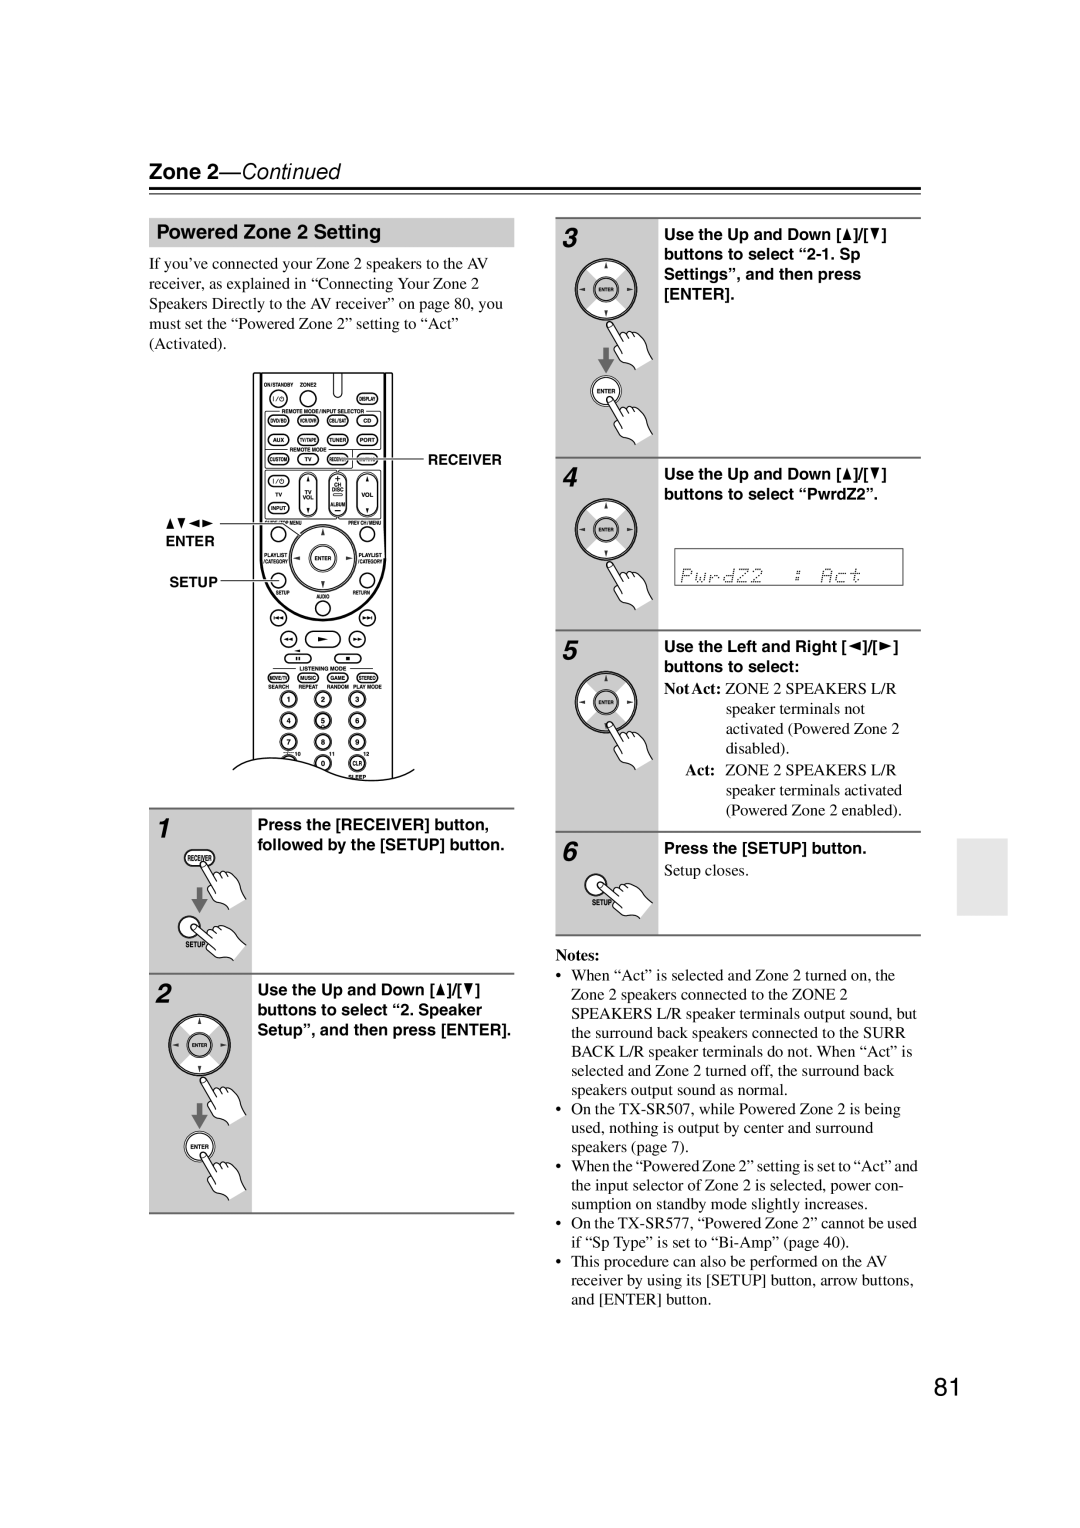 Onkyo SR507, TX-SR577 instruction manual Zone 2-Continued, Powered Zone 2 Setting, Setup closes, Notes 